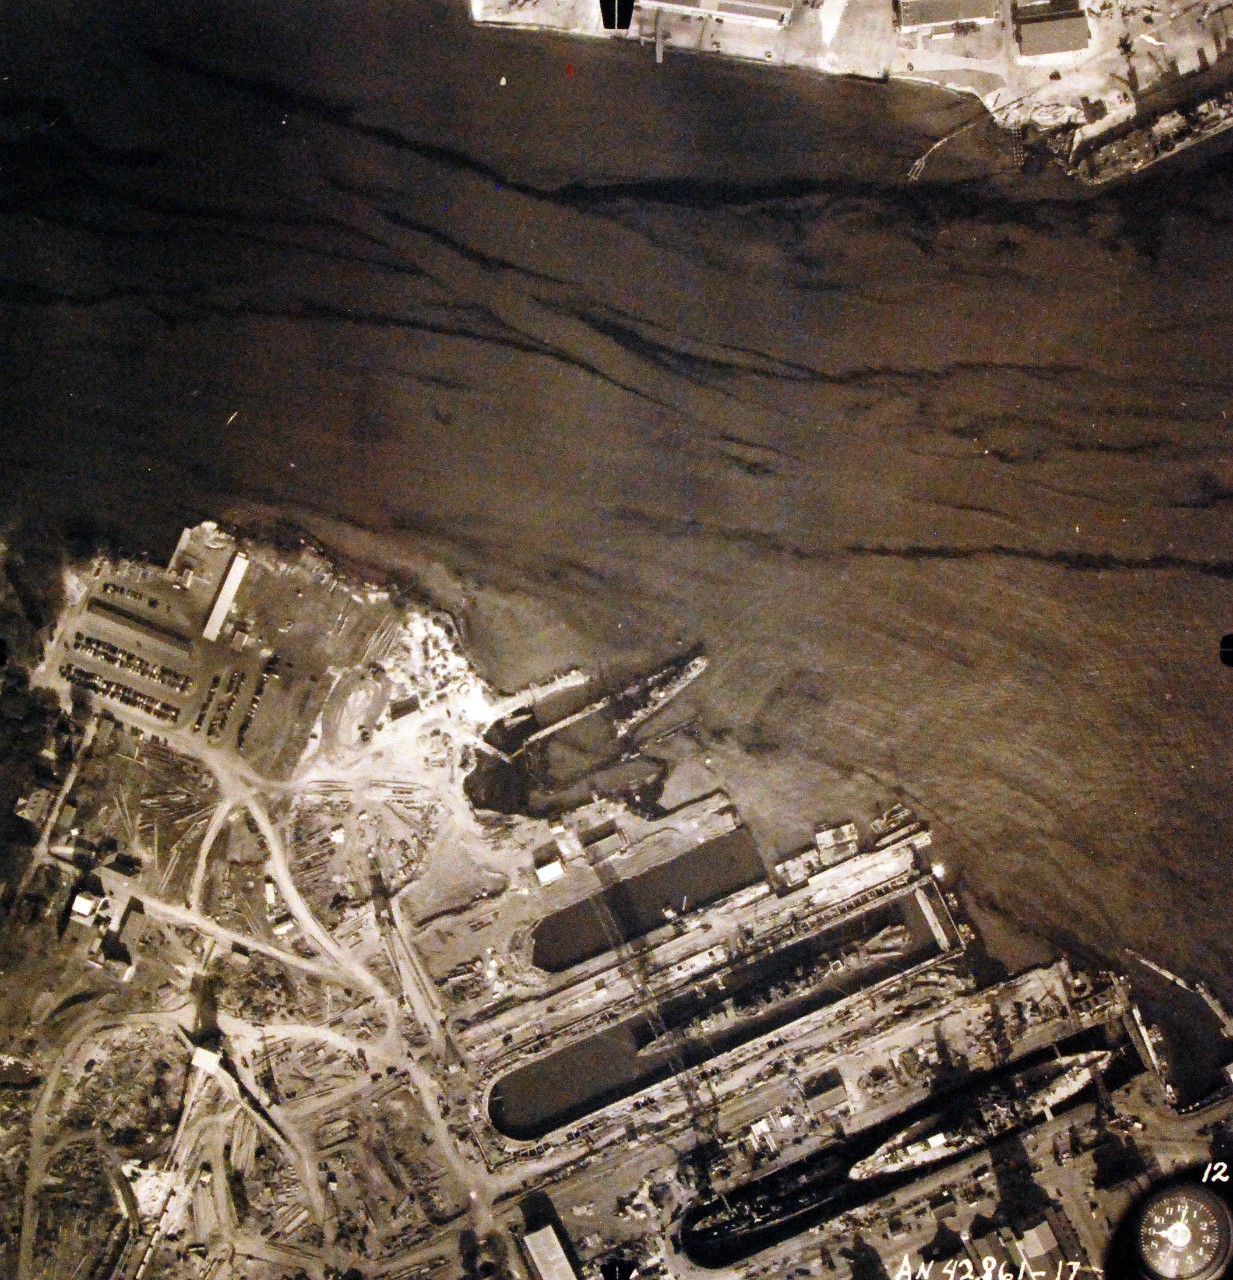 80-G-387578:  Pearl Harbor Attack, 7 December 1941.  Aerial view of "Battleship Row" moorings on the southern side of Ford Island, 10 December 1941, showing damage from the Japanese raid three days earlier.  Ships shown are, (right to left):  USS Pennsylvania (BB 38); USS Cassin (DD 372); USS Downes (DD 375); USS Helena (CL 50) and USS Shaw (DD 373).  Note dark oil streaks on the harbor surface, originating from the sunken battleships. Photographed by VJ-1 at an altitude of 3,000 feet and released November 9, 1950. U.S. Navy photograph, now in the collections of the National Archives.      (9/22/2015).